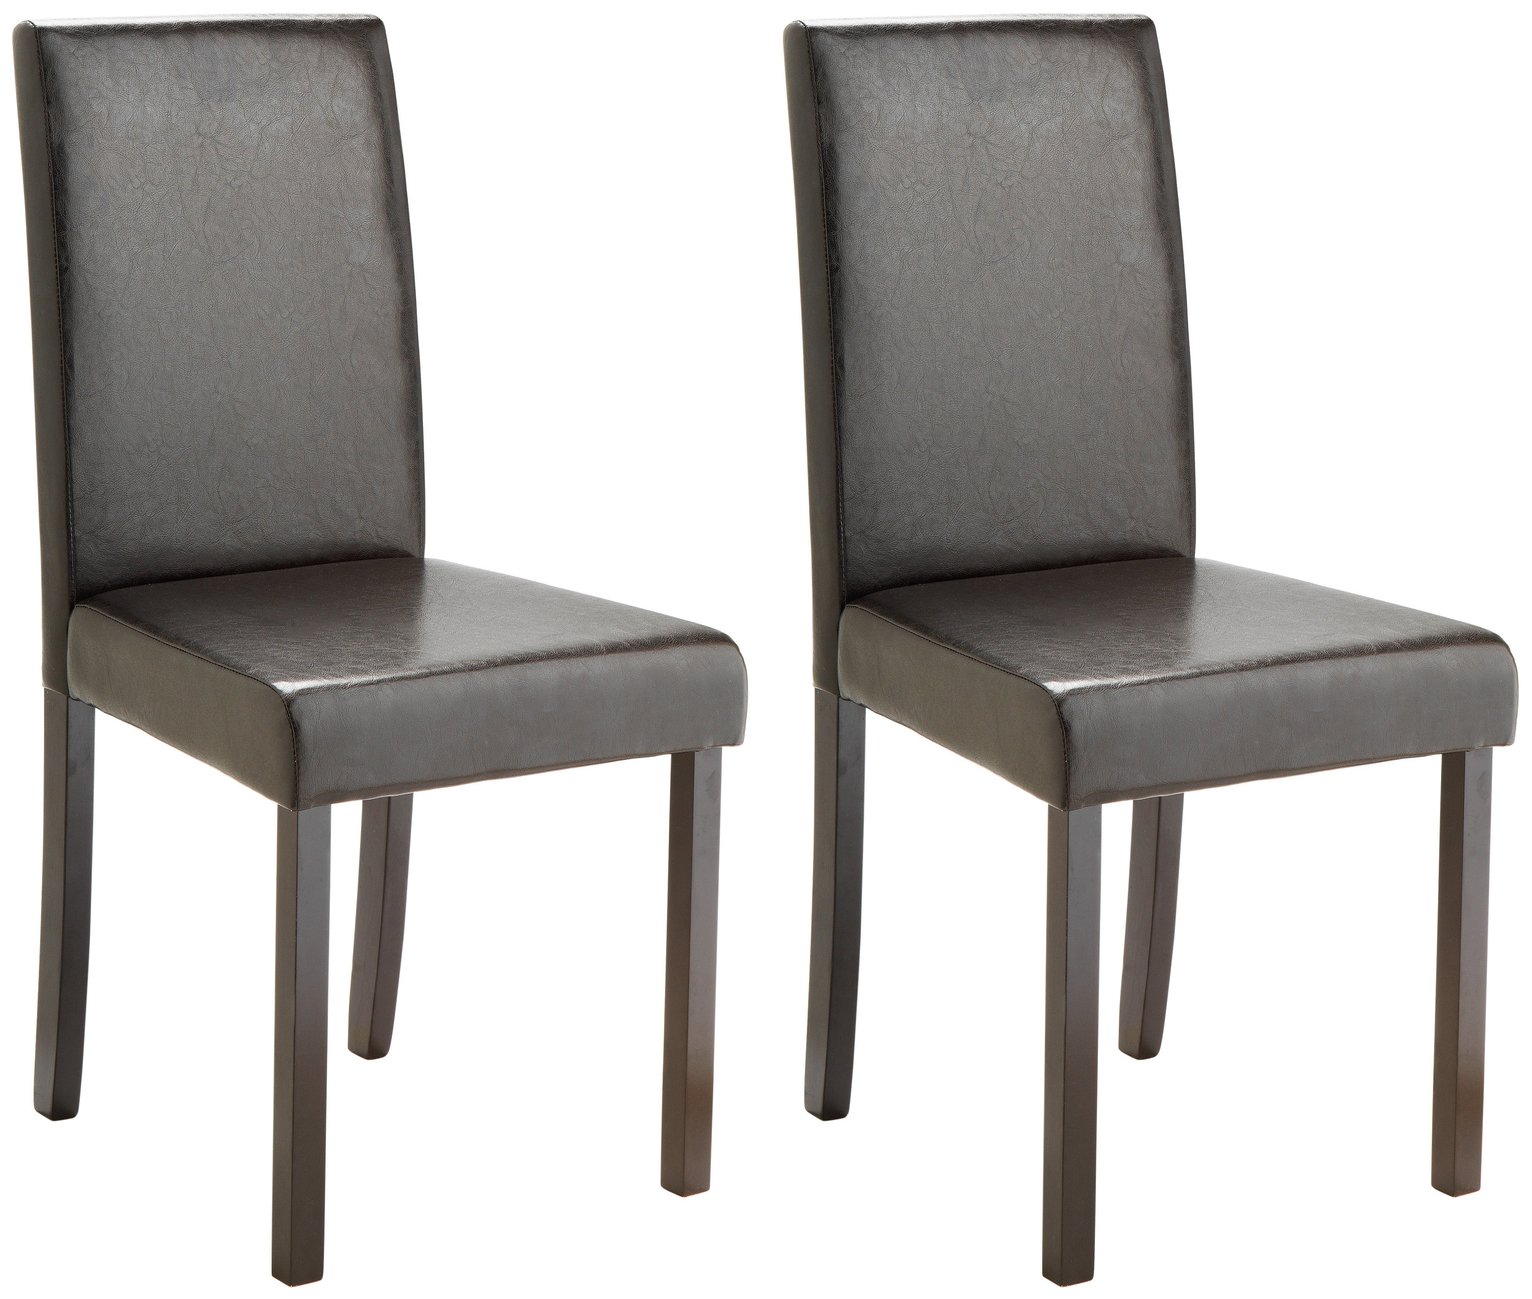 Argos Home Pair of Leather Effect Mid Back Chairs - Black